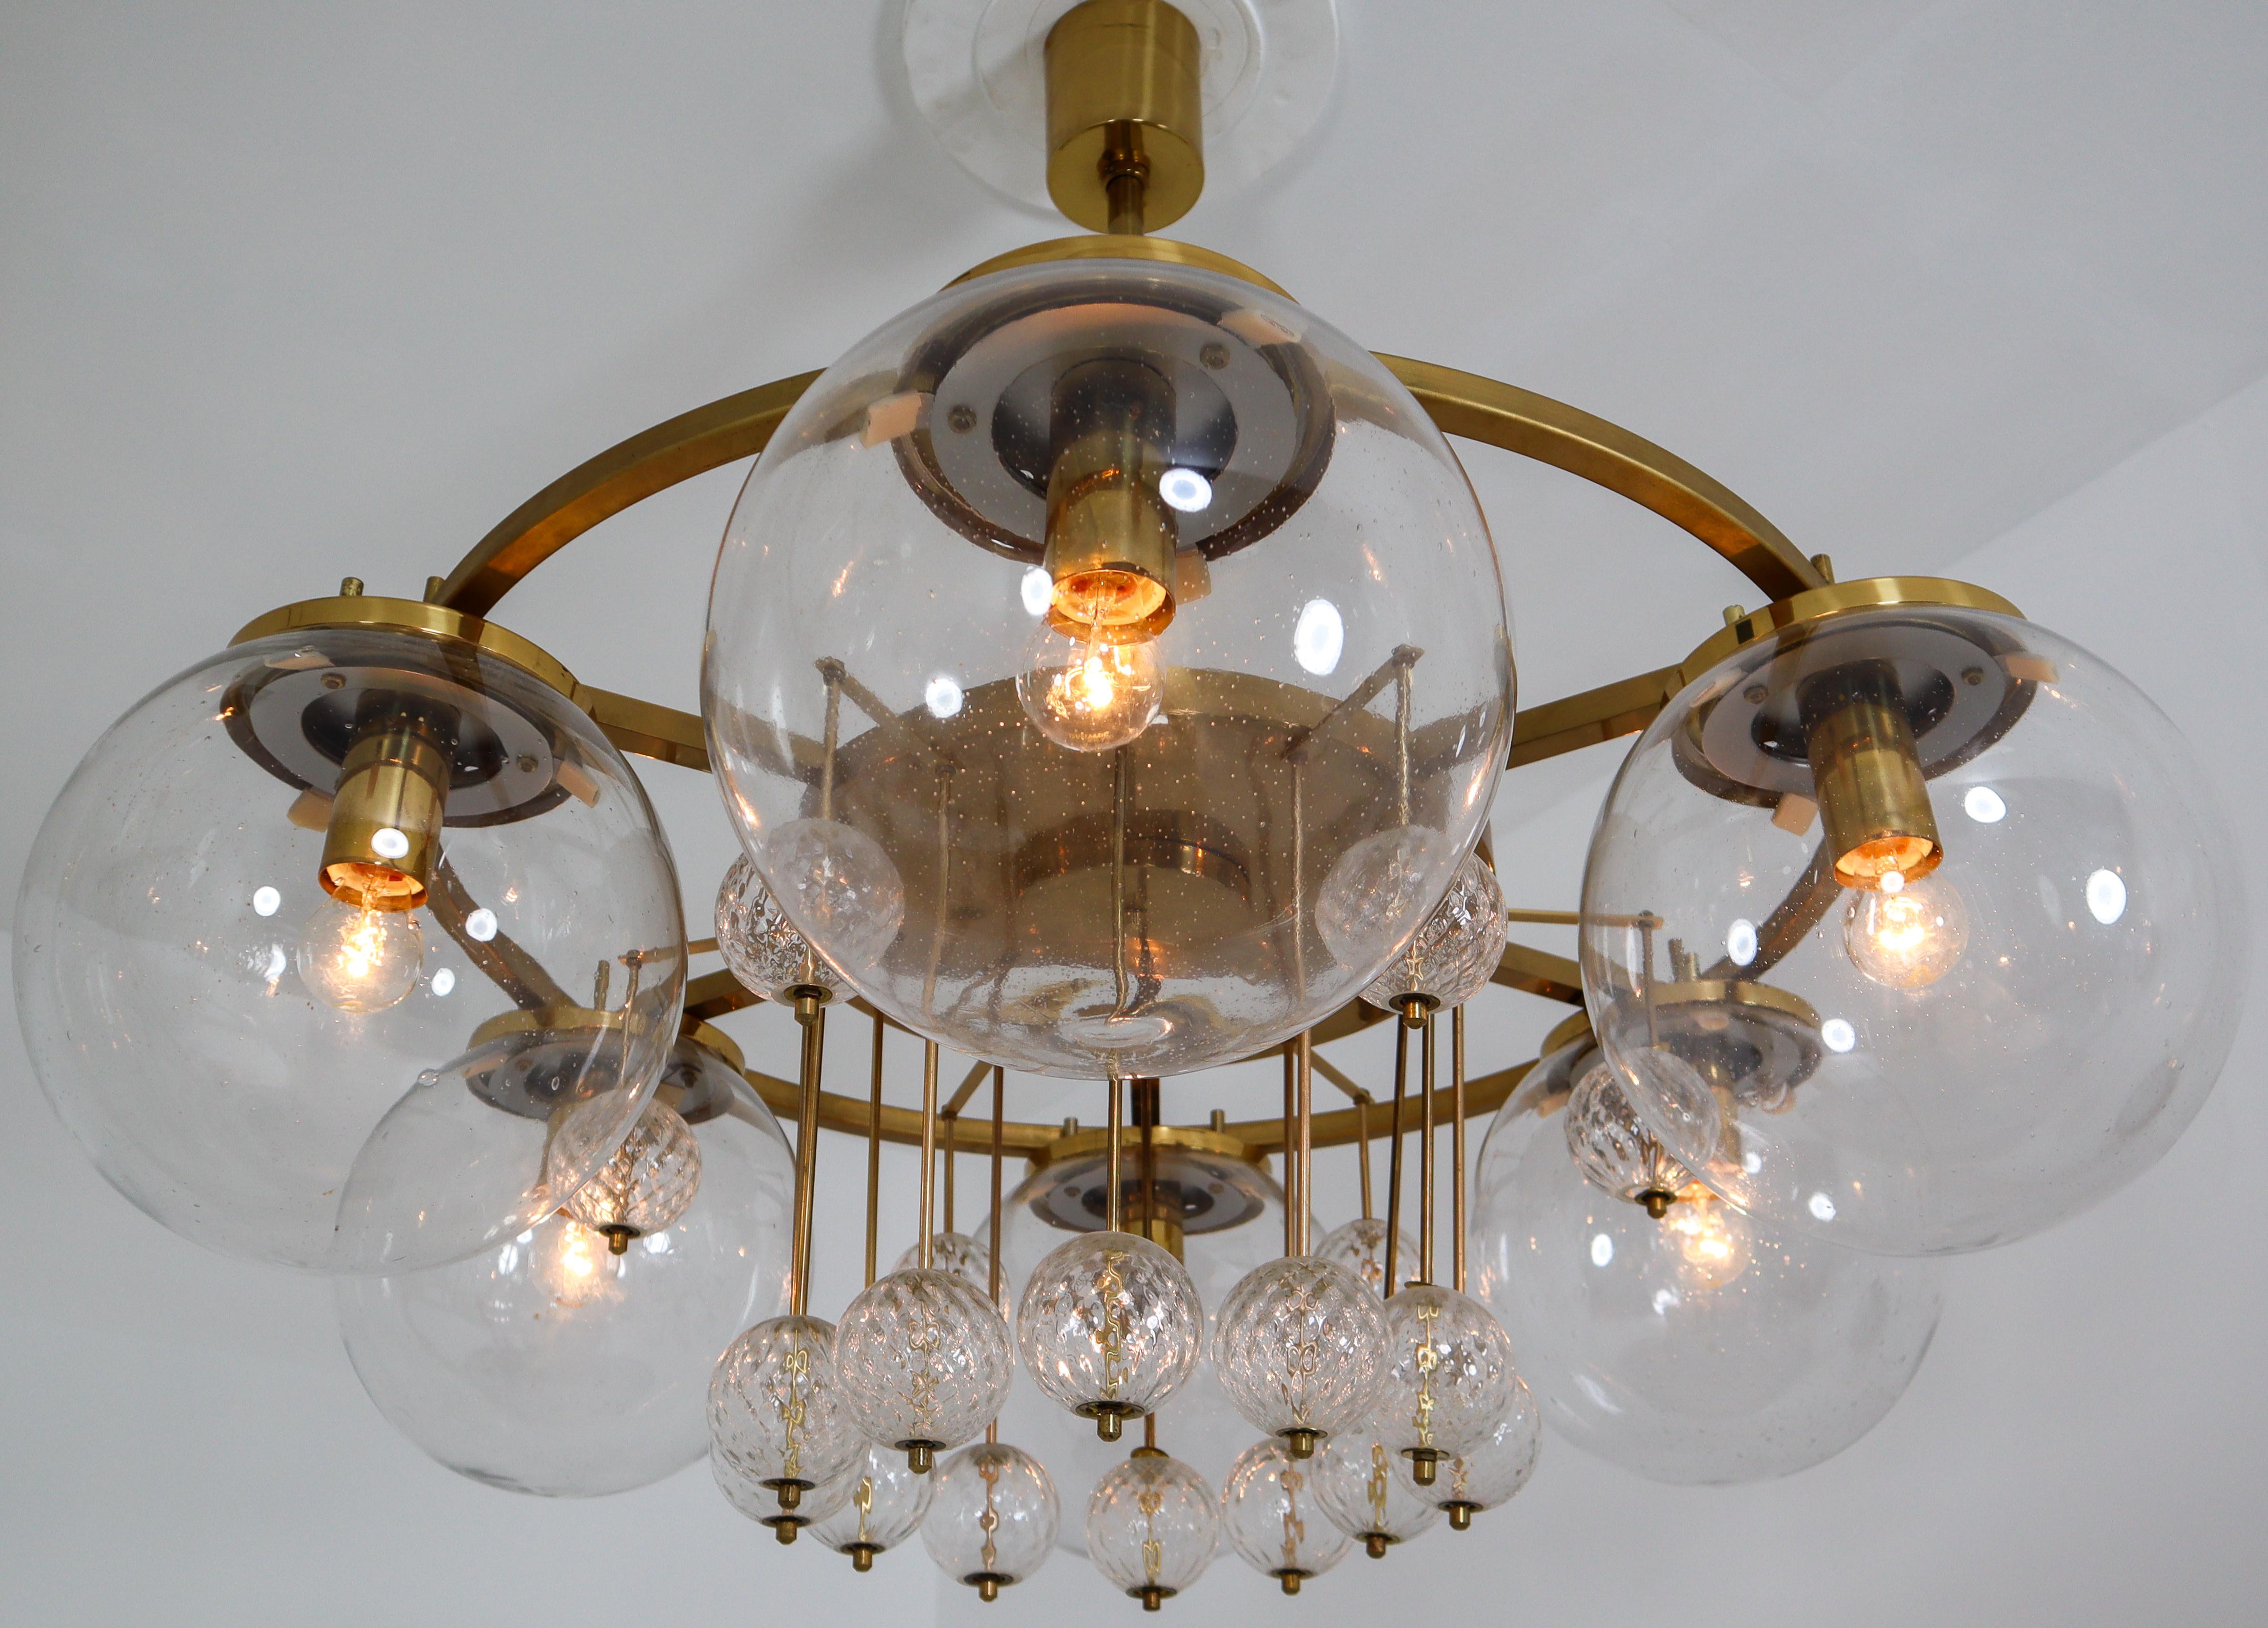 Six large hotel chandeliers with brass fixture and large hand blowed glass. These chandeliers with brass frame consist of six lights, formed in a circle, with glass shades. The pleasant light it spreads is very atmospheric. Completed with the